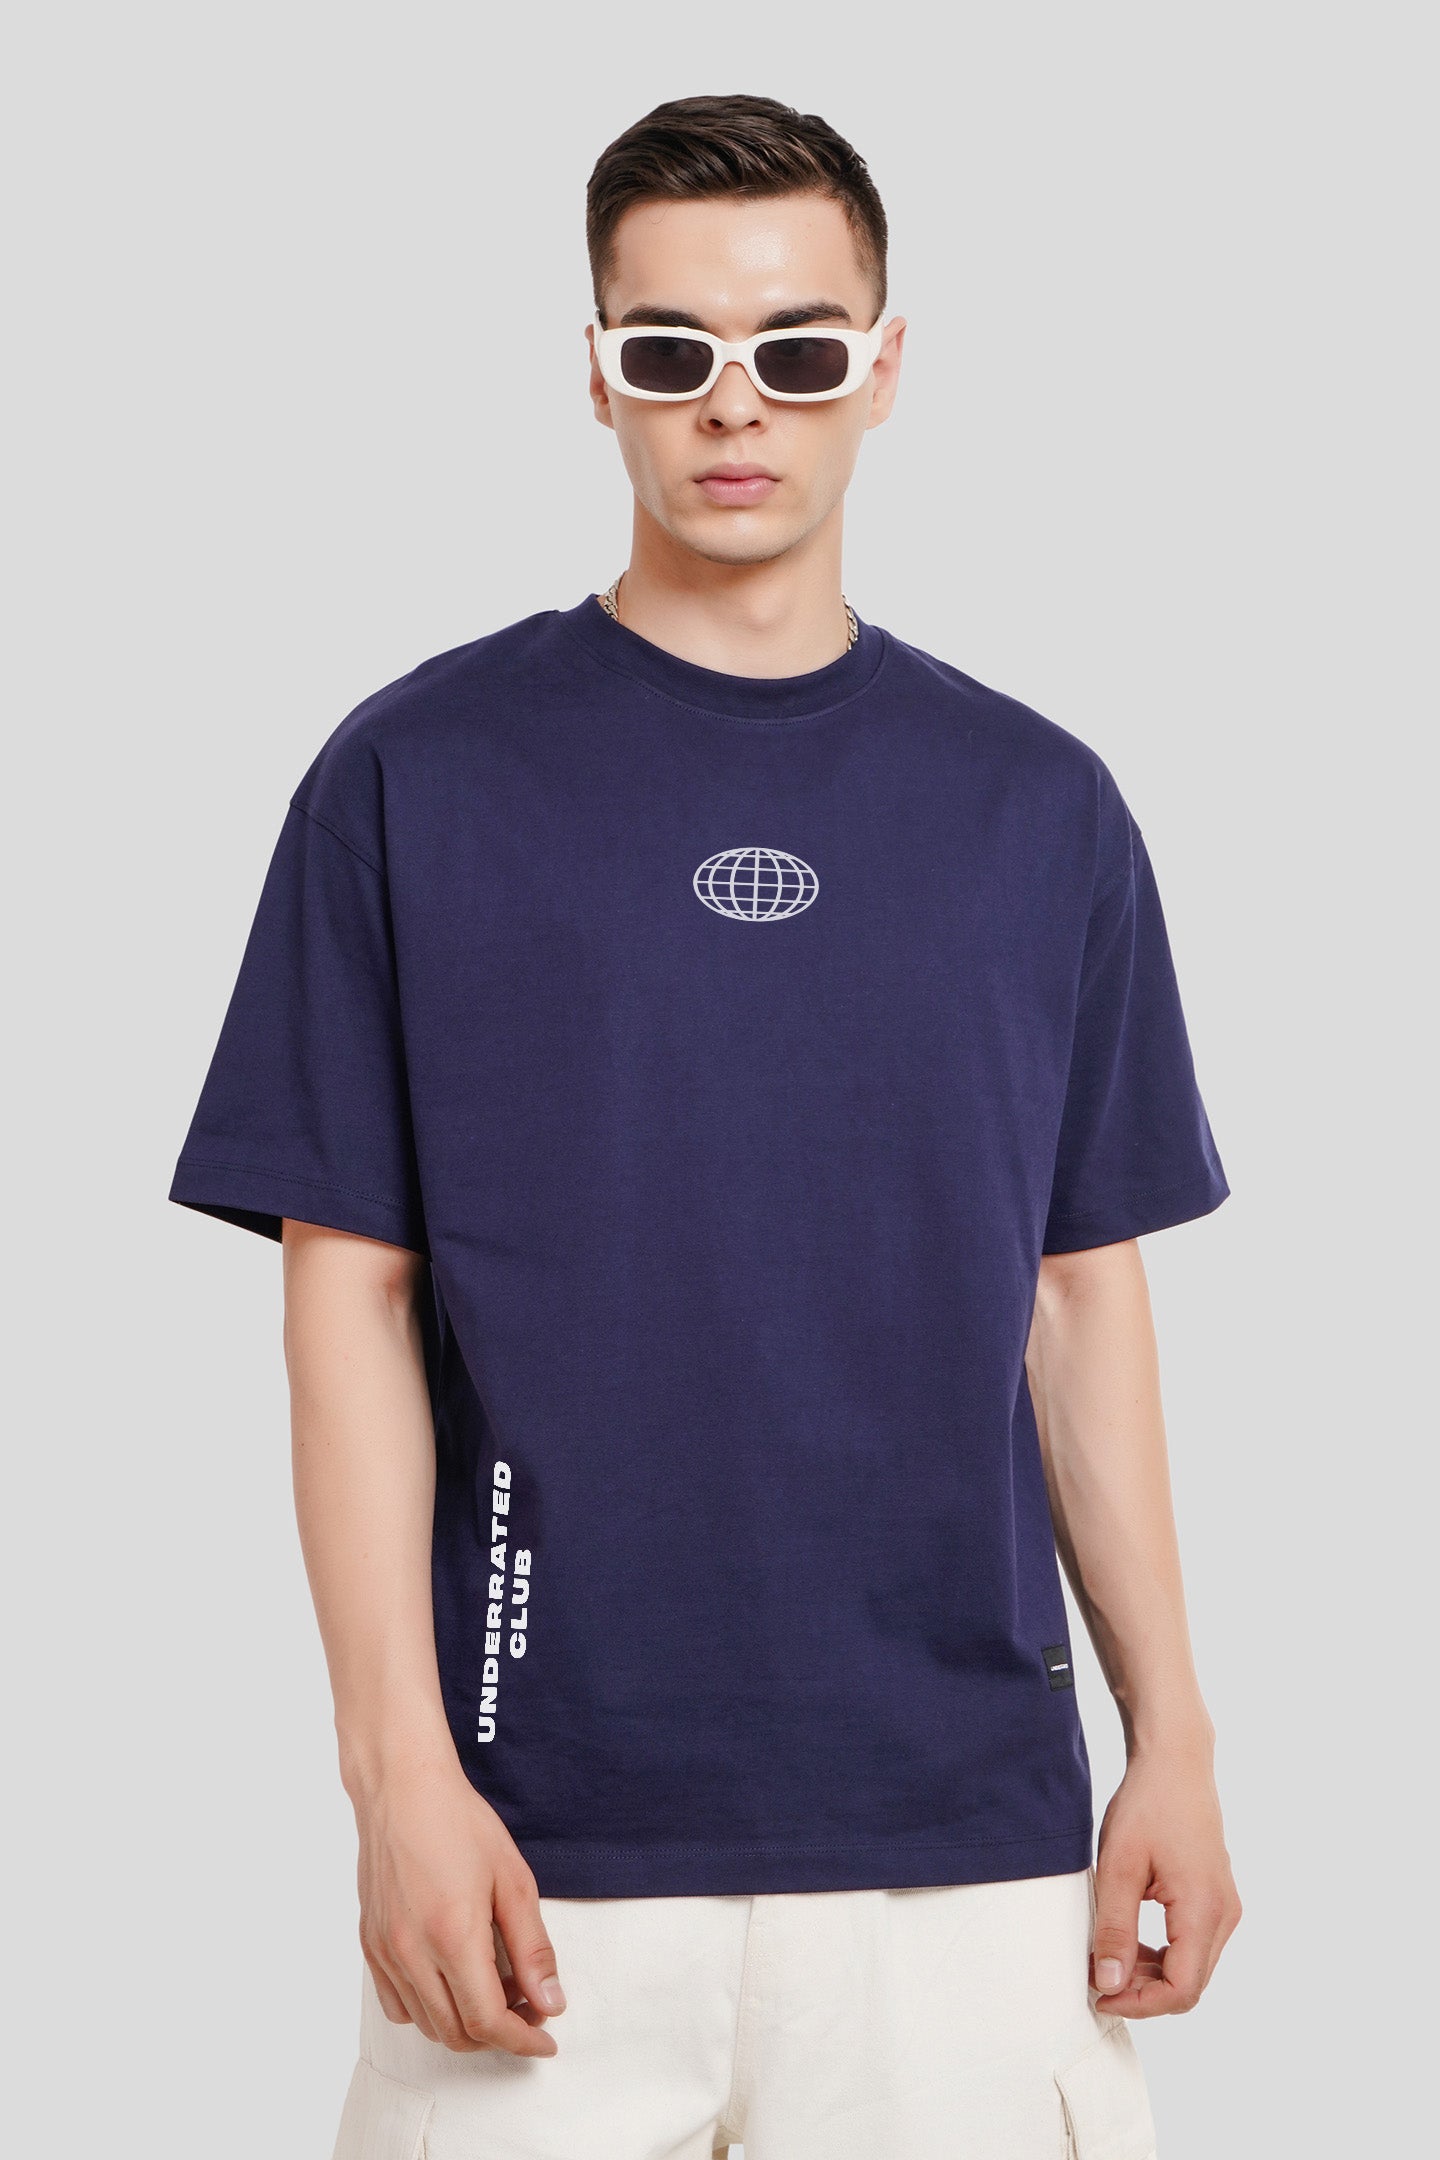 Drip Navy Blue Printed T Shirt Men Oversized Fit With Front And Back Design Pic 1